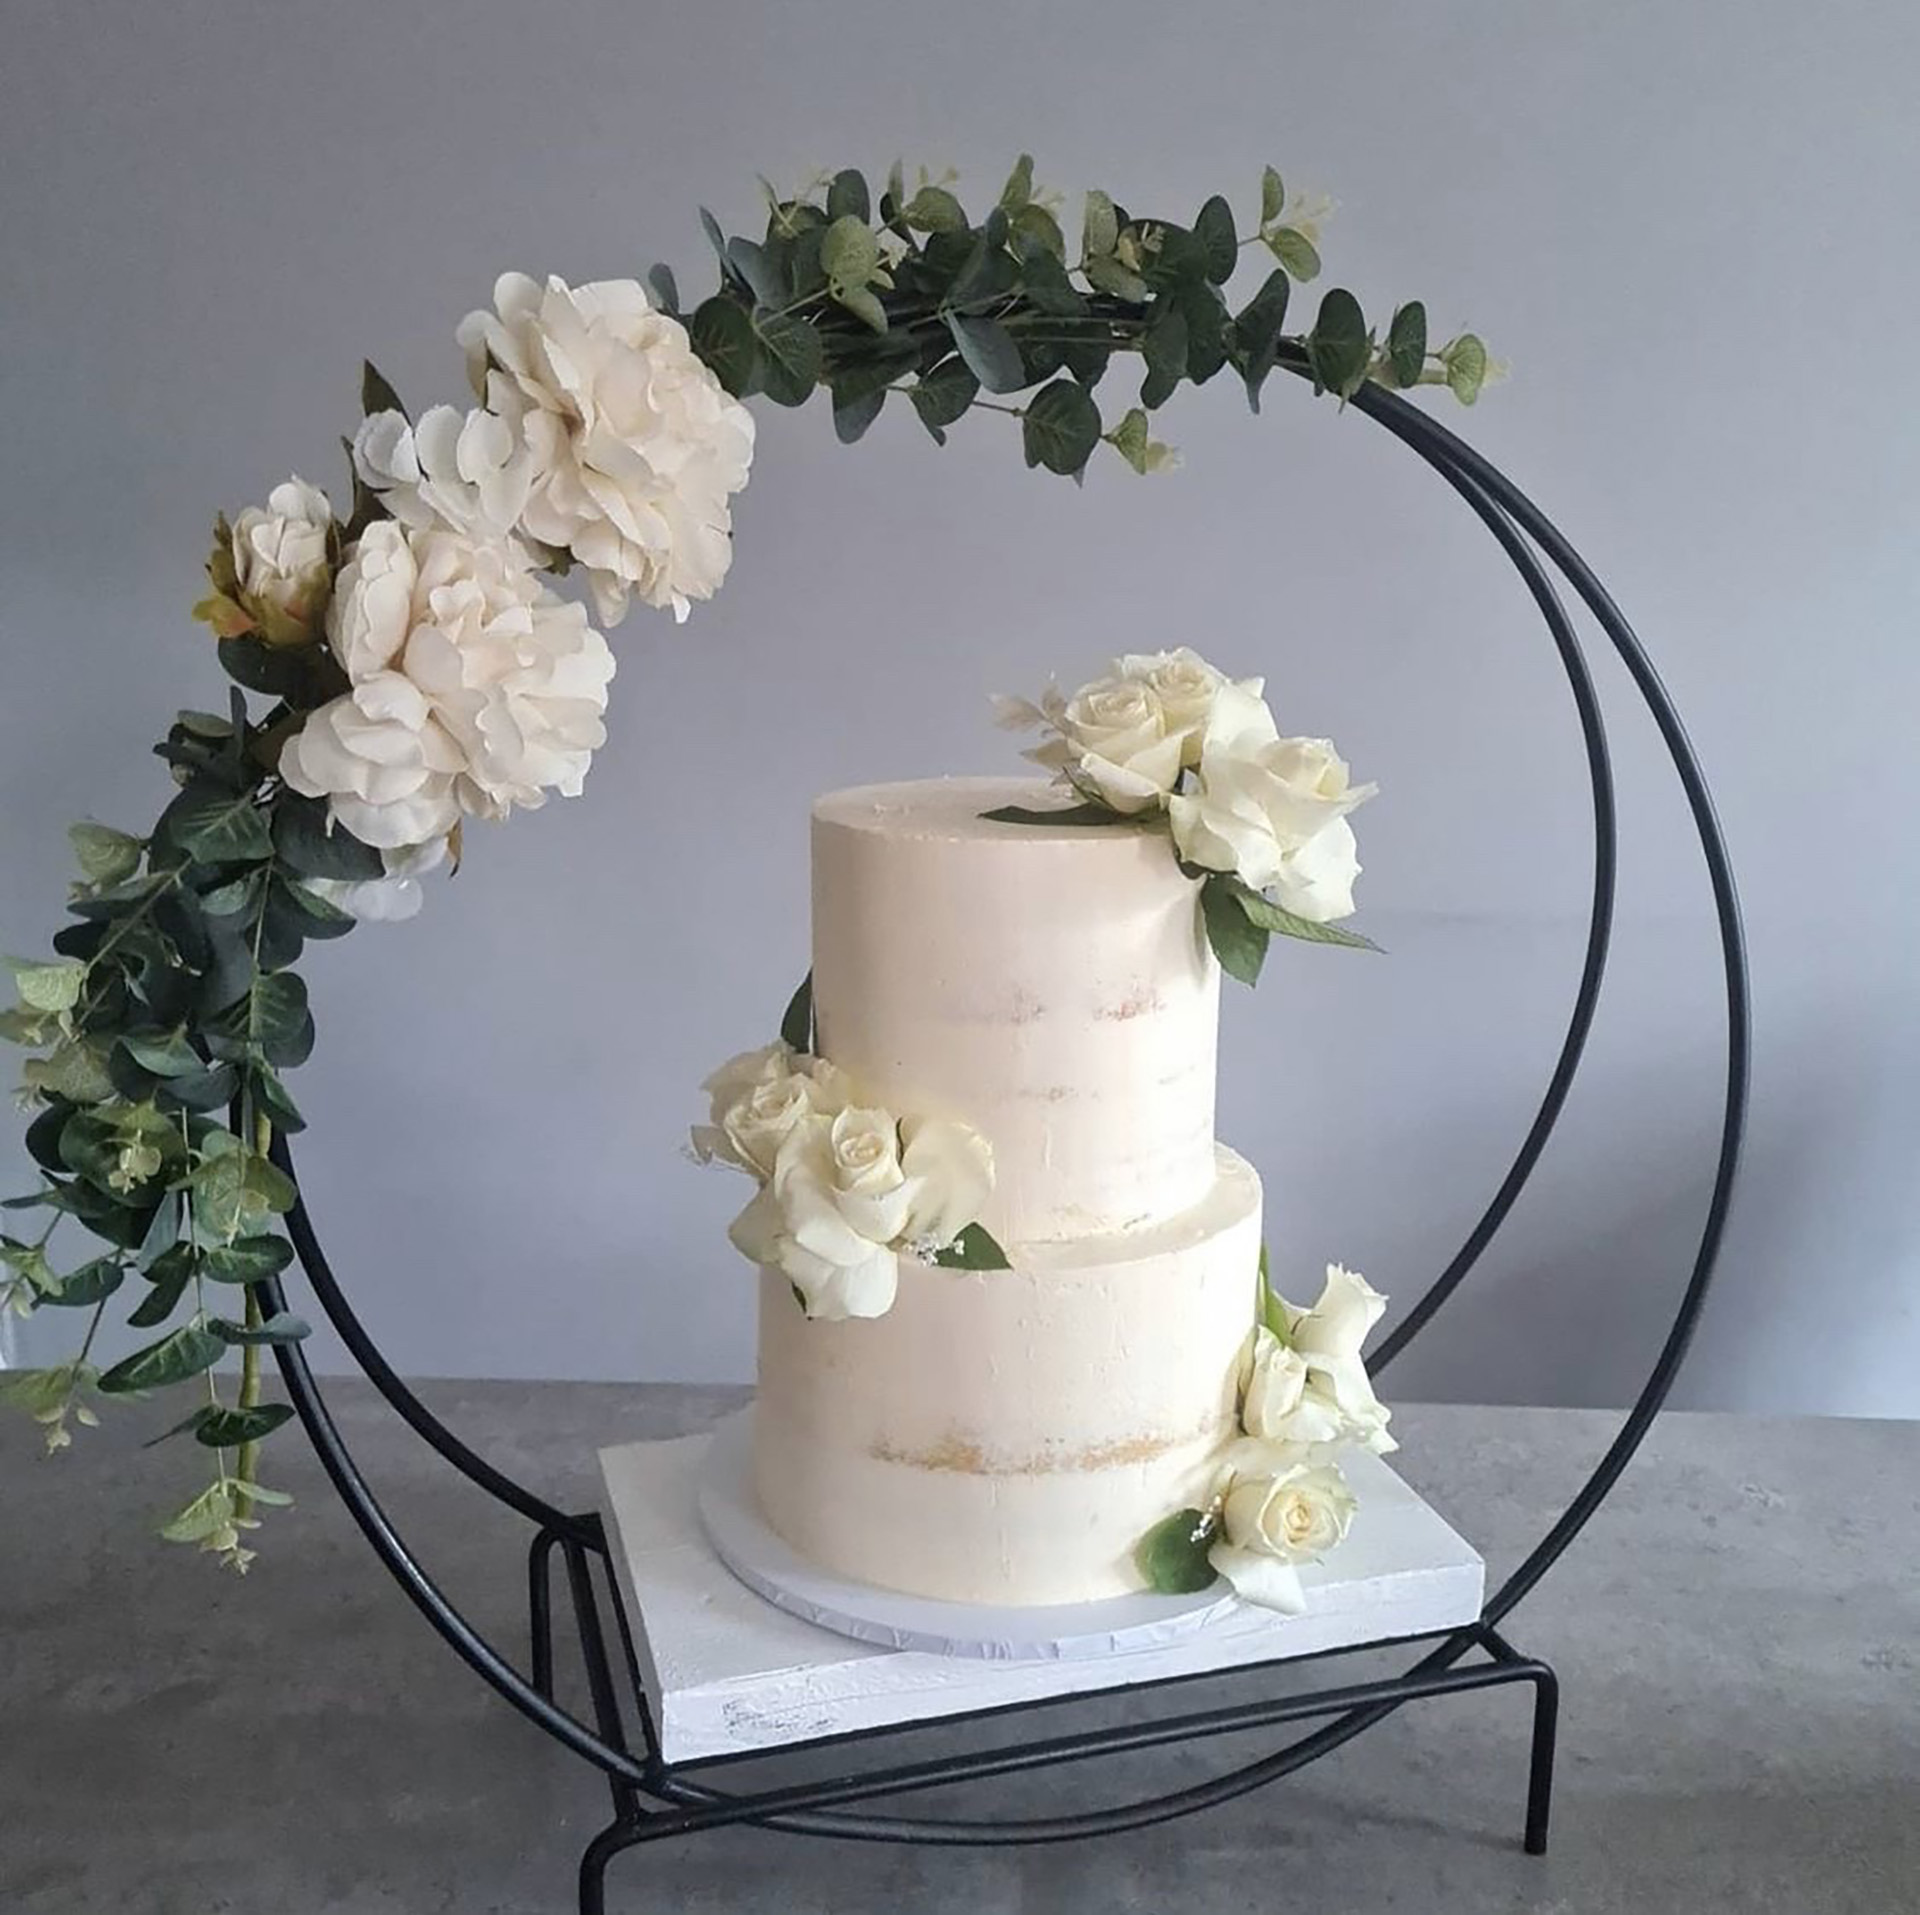 Cake stand with hoop on a sturdy surface with 2 tier cake